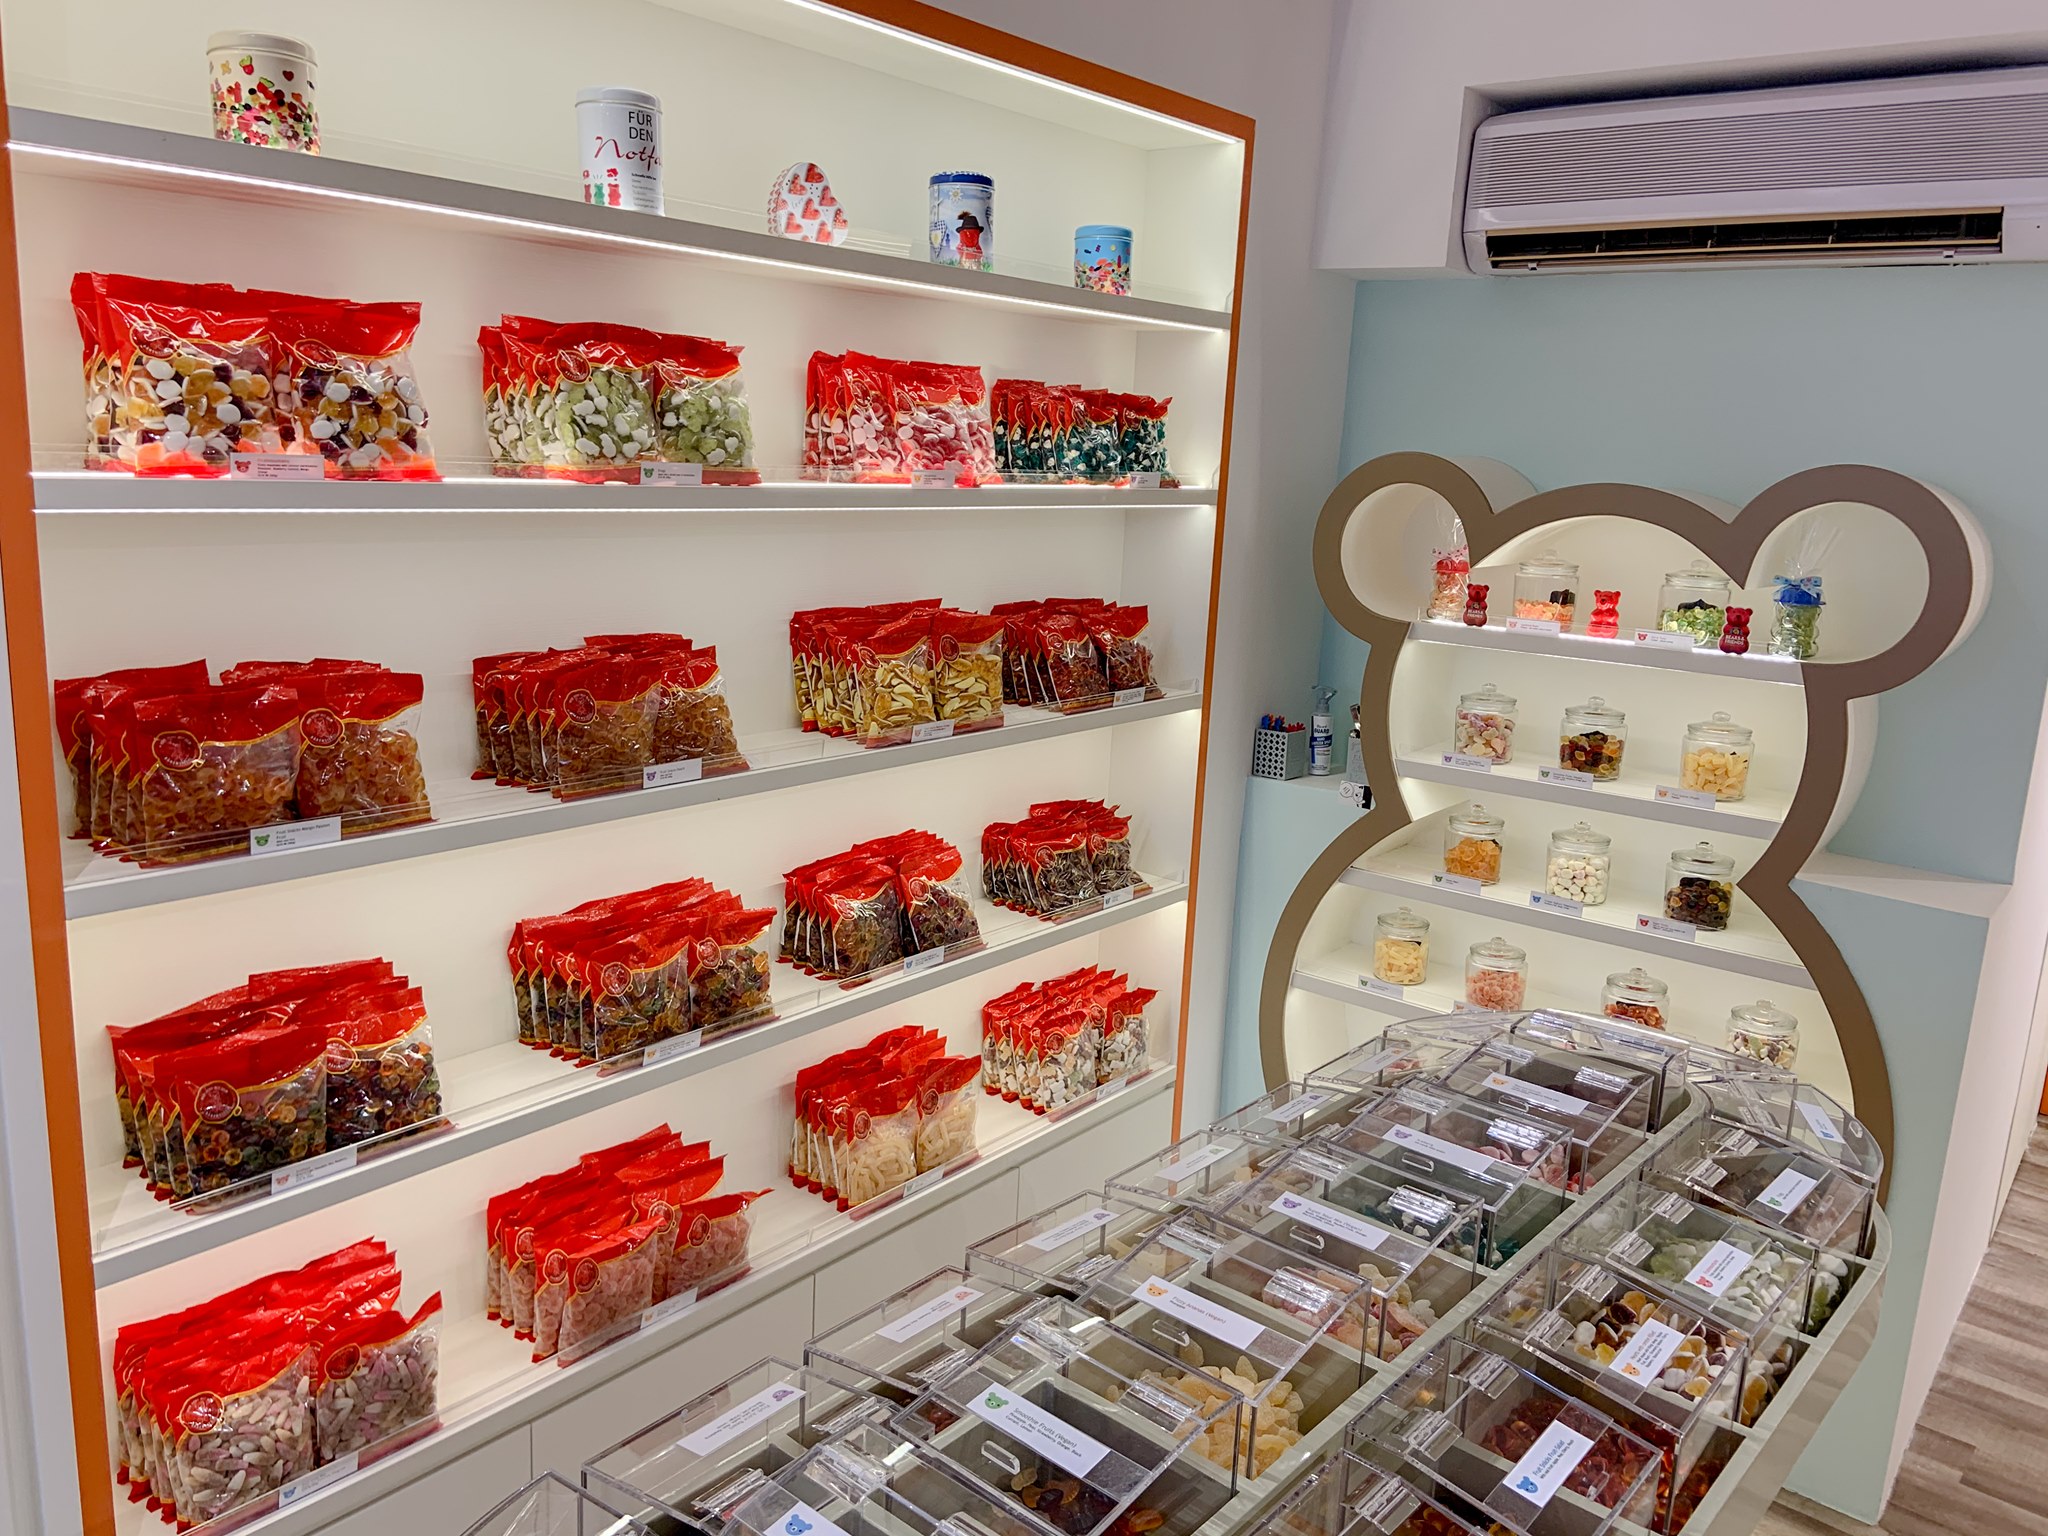 Haji Lane Candy Store Sells Over 80 Types Of Gummies Including Alcoholic Chilli Vegan Ones Mothership Sg News From Singapore Asia And Around The World